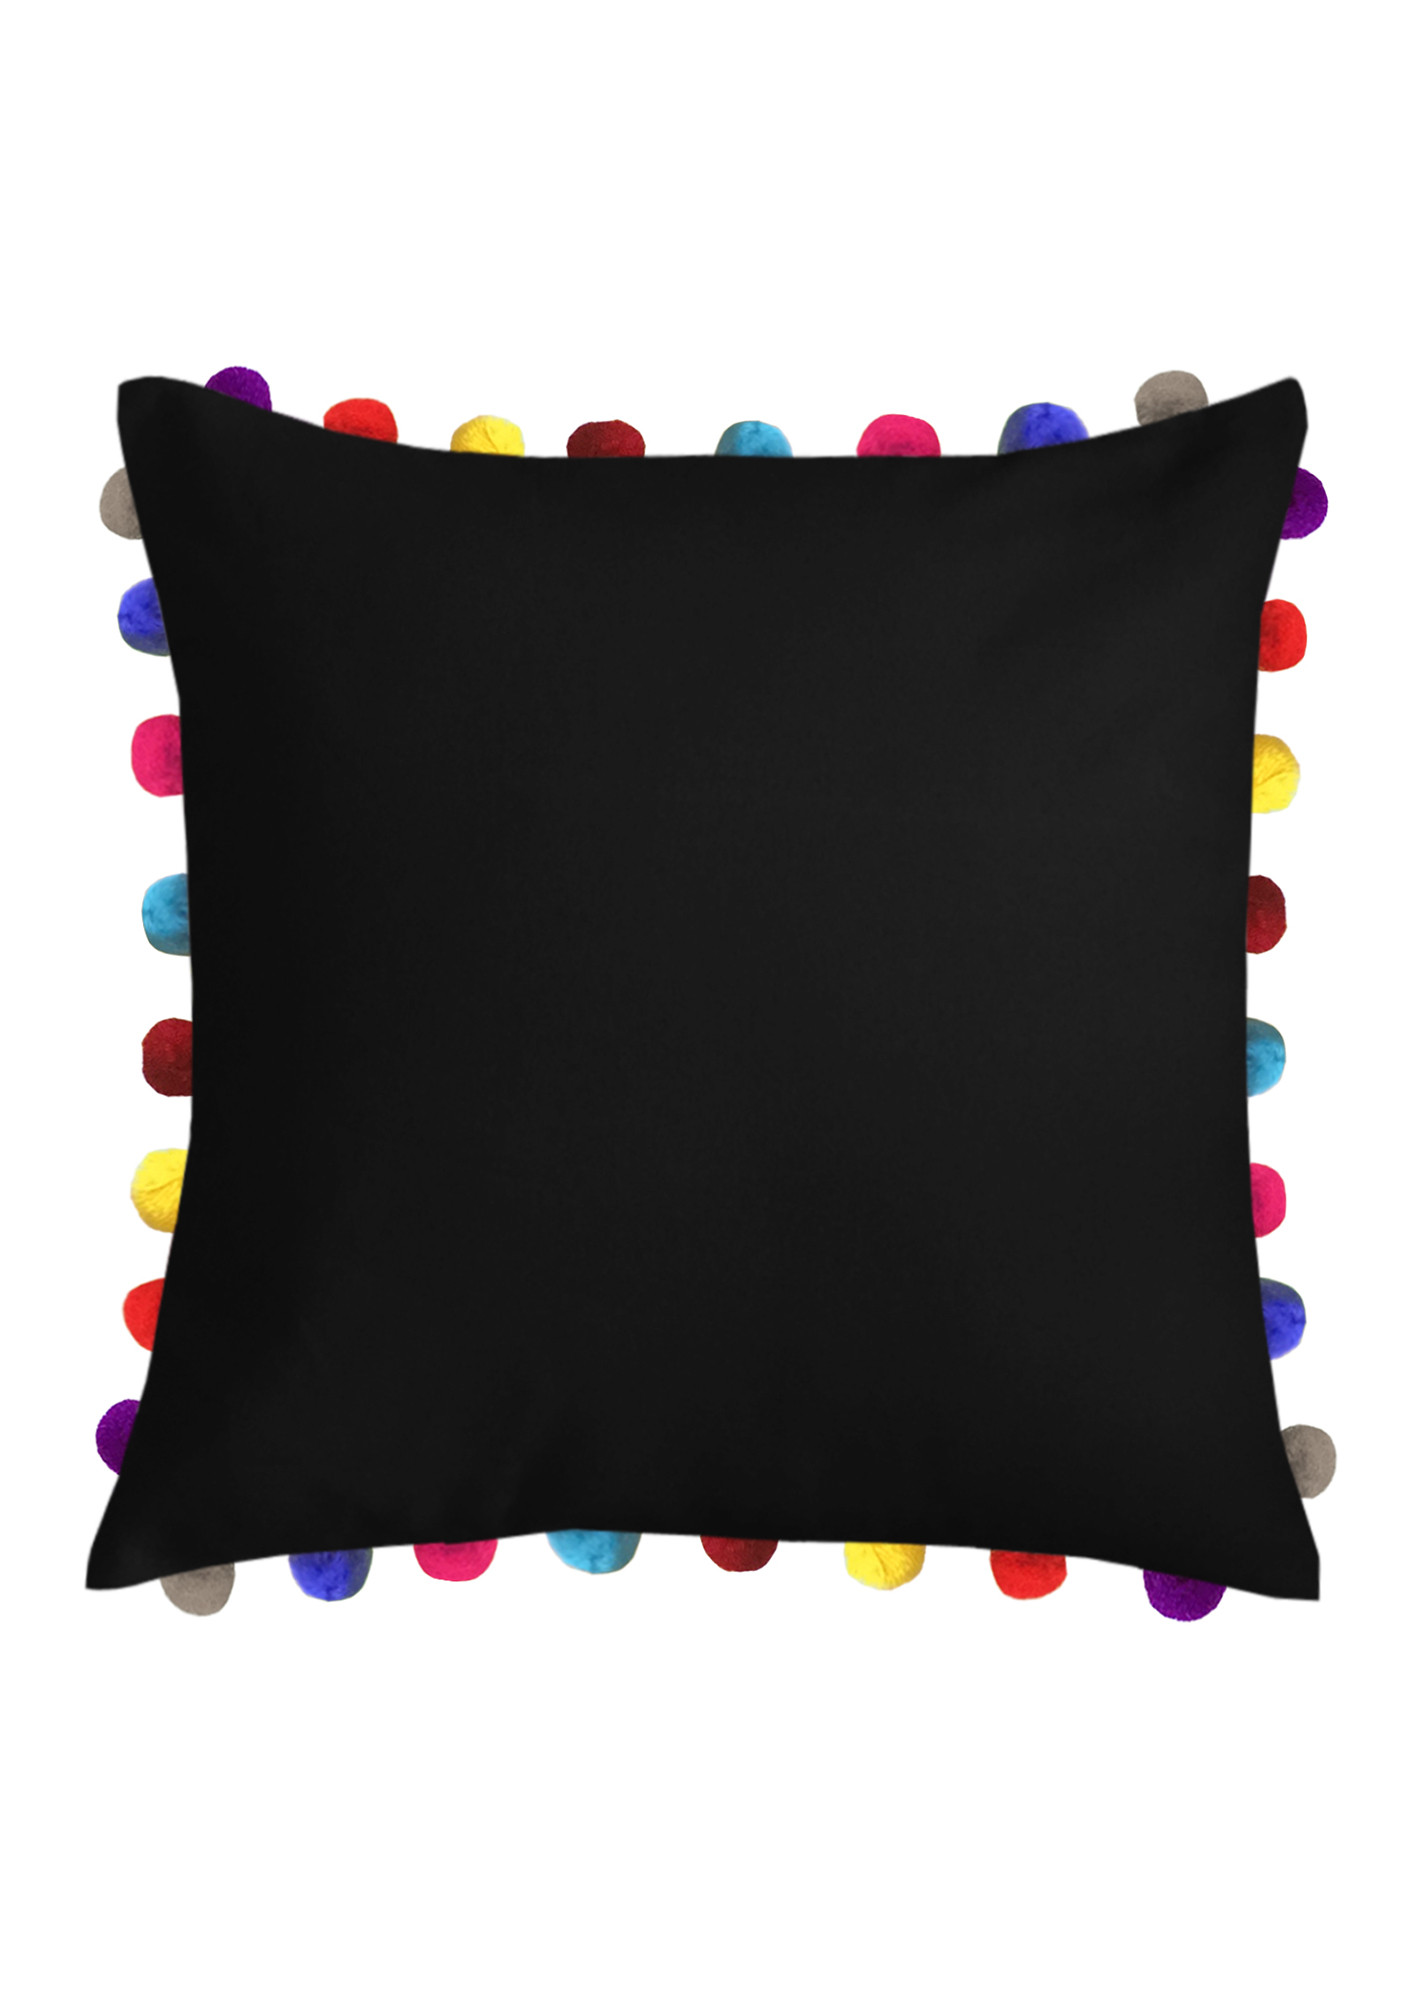 Lushomes Pirate Black Sofa Cushion Cover Online with Colorful Pom Pom (Pack of 1 Pc, 24 x 24 inches)